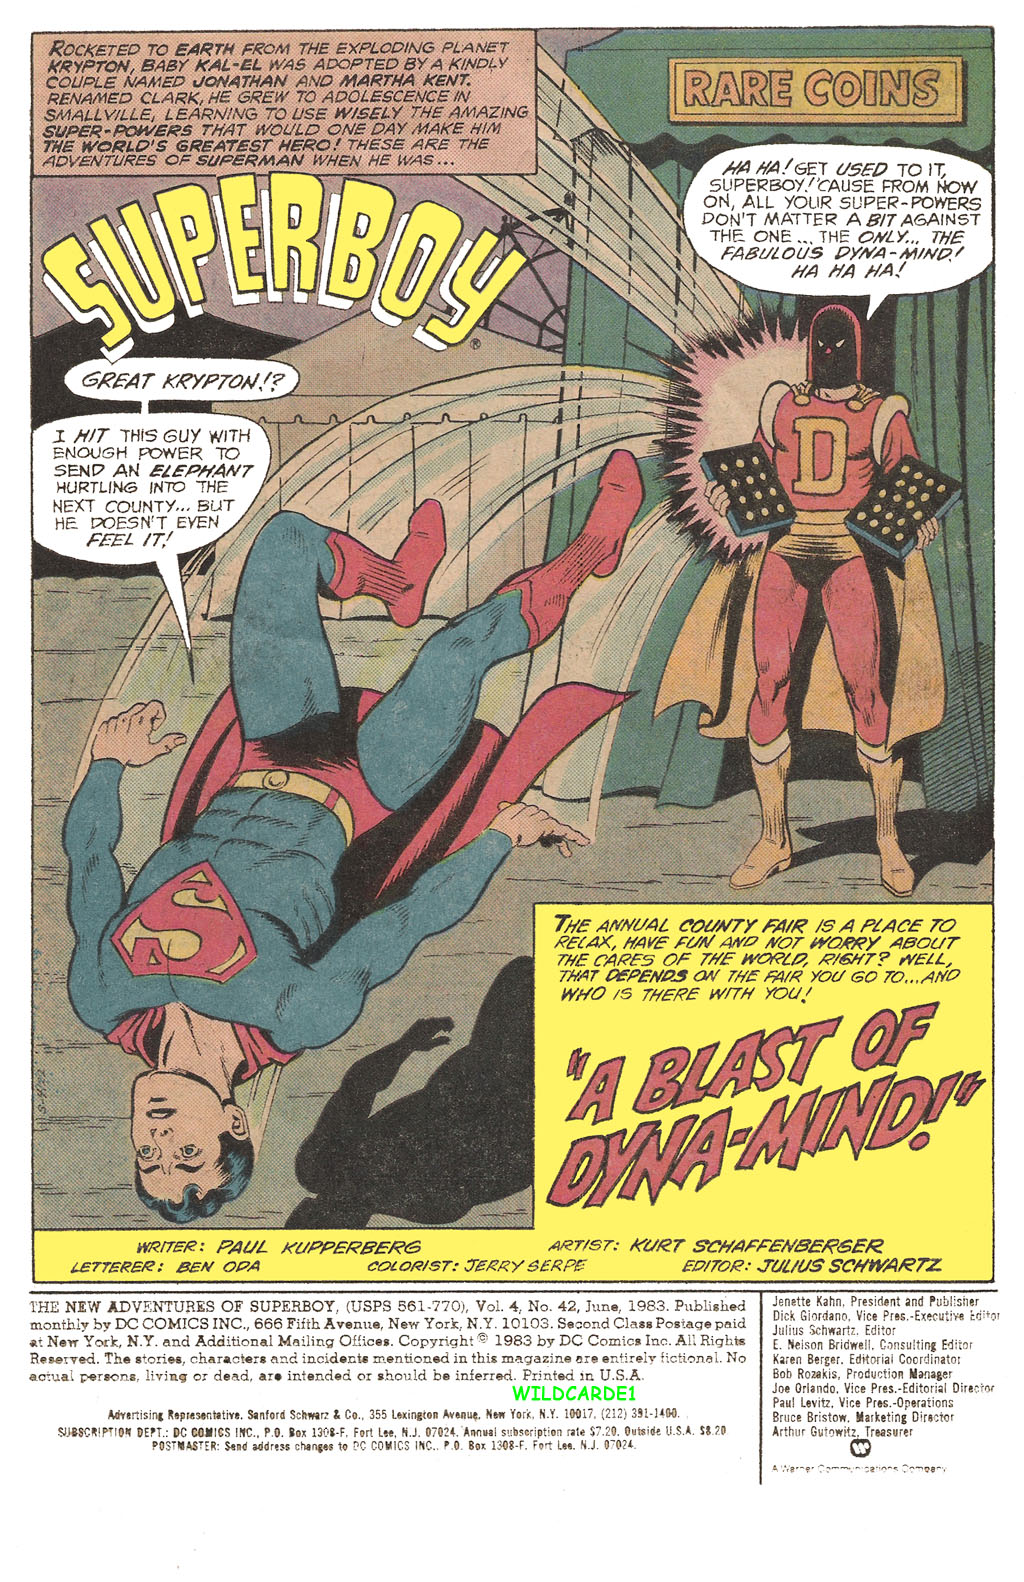 The New Adventures of Superboy 42 Page 1